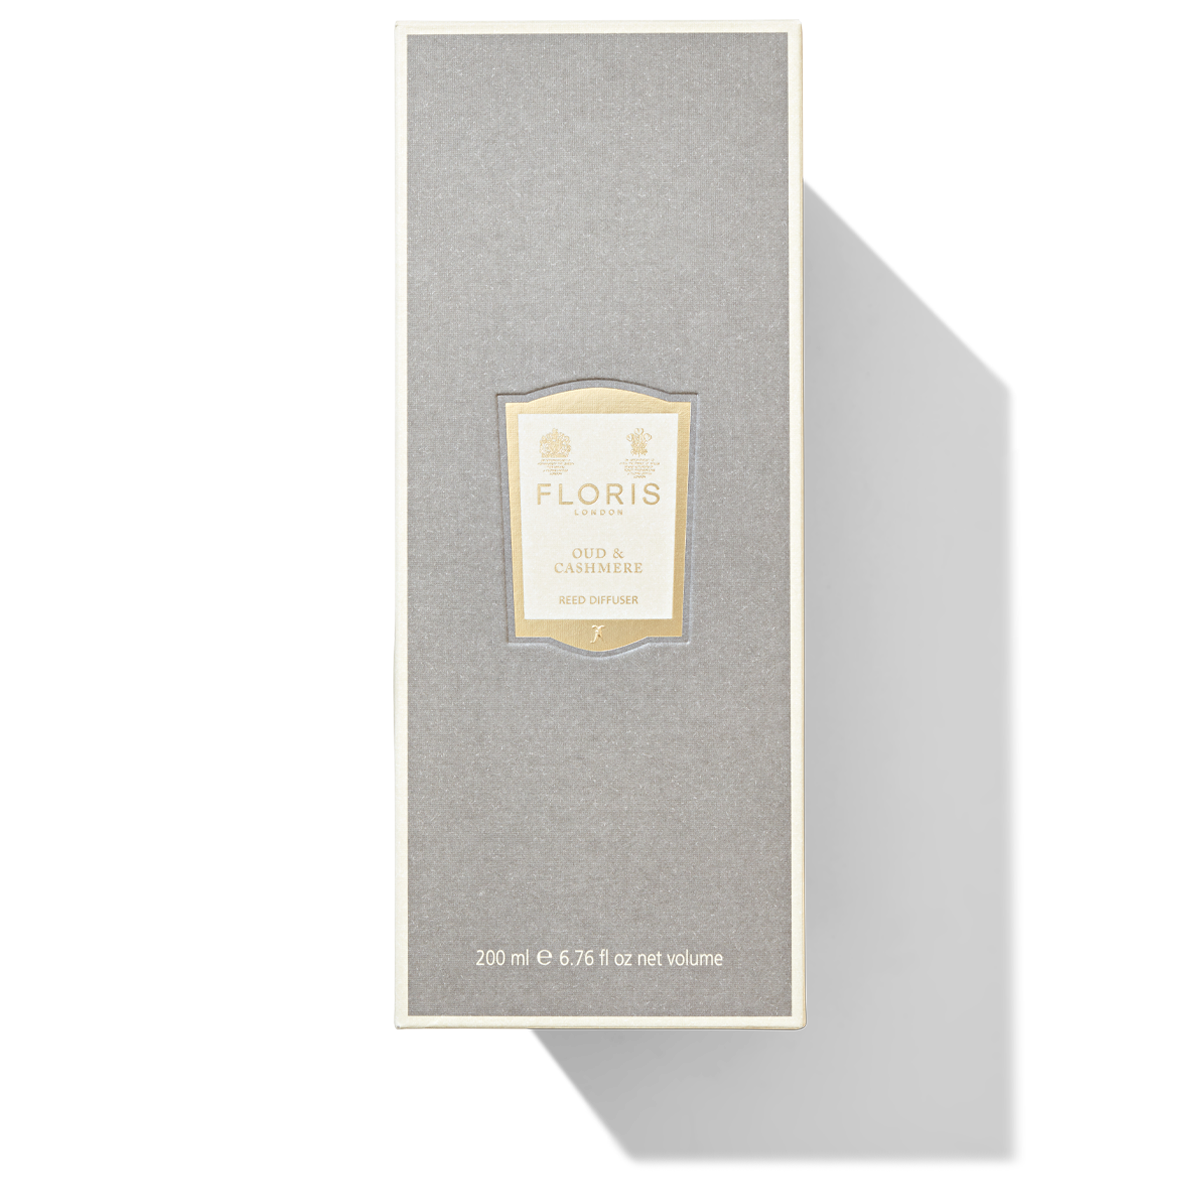 Large, tall grey box with a cream and gold label containing the Oud & Cashmere Reed Diffuser